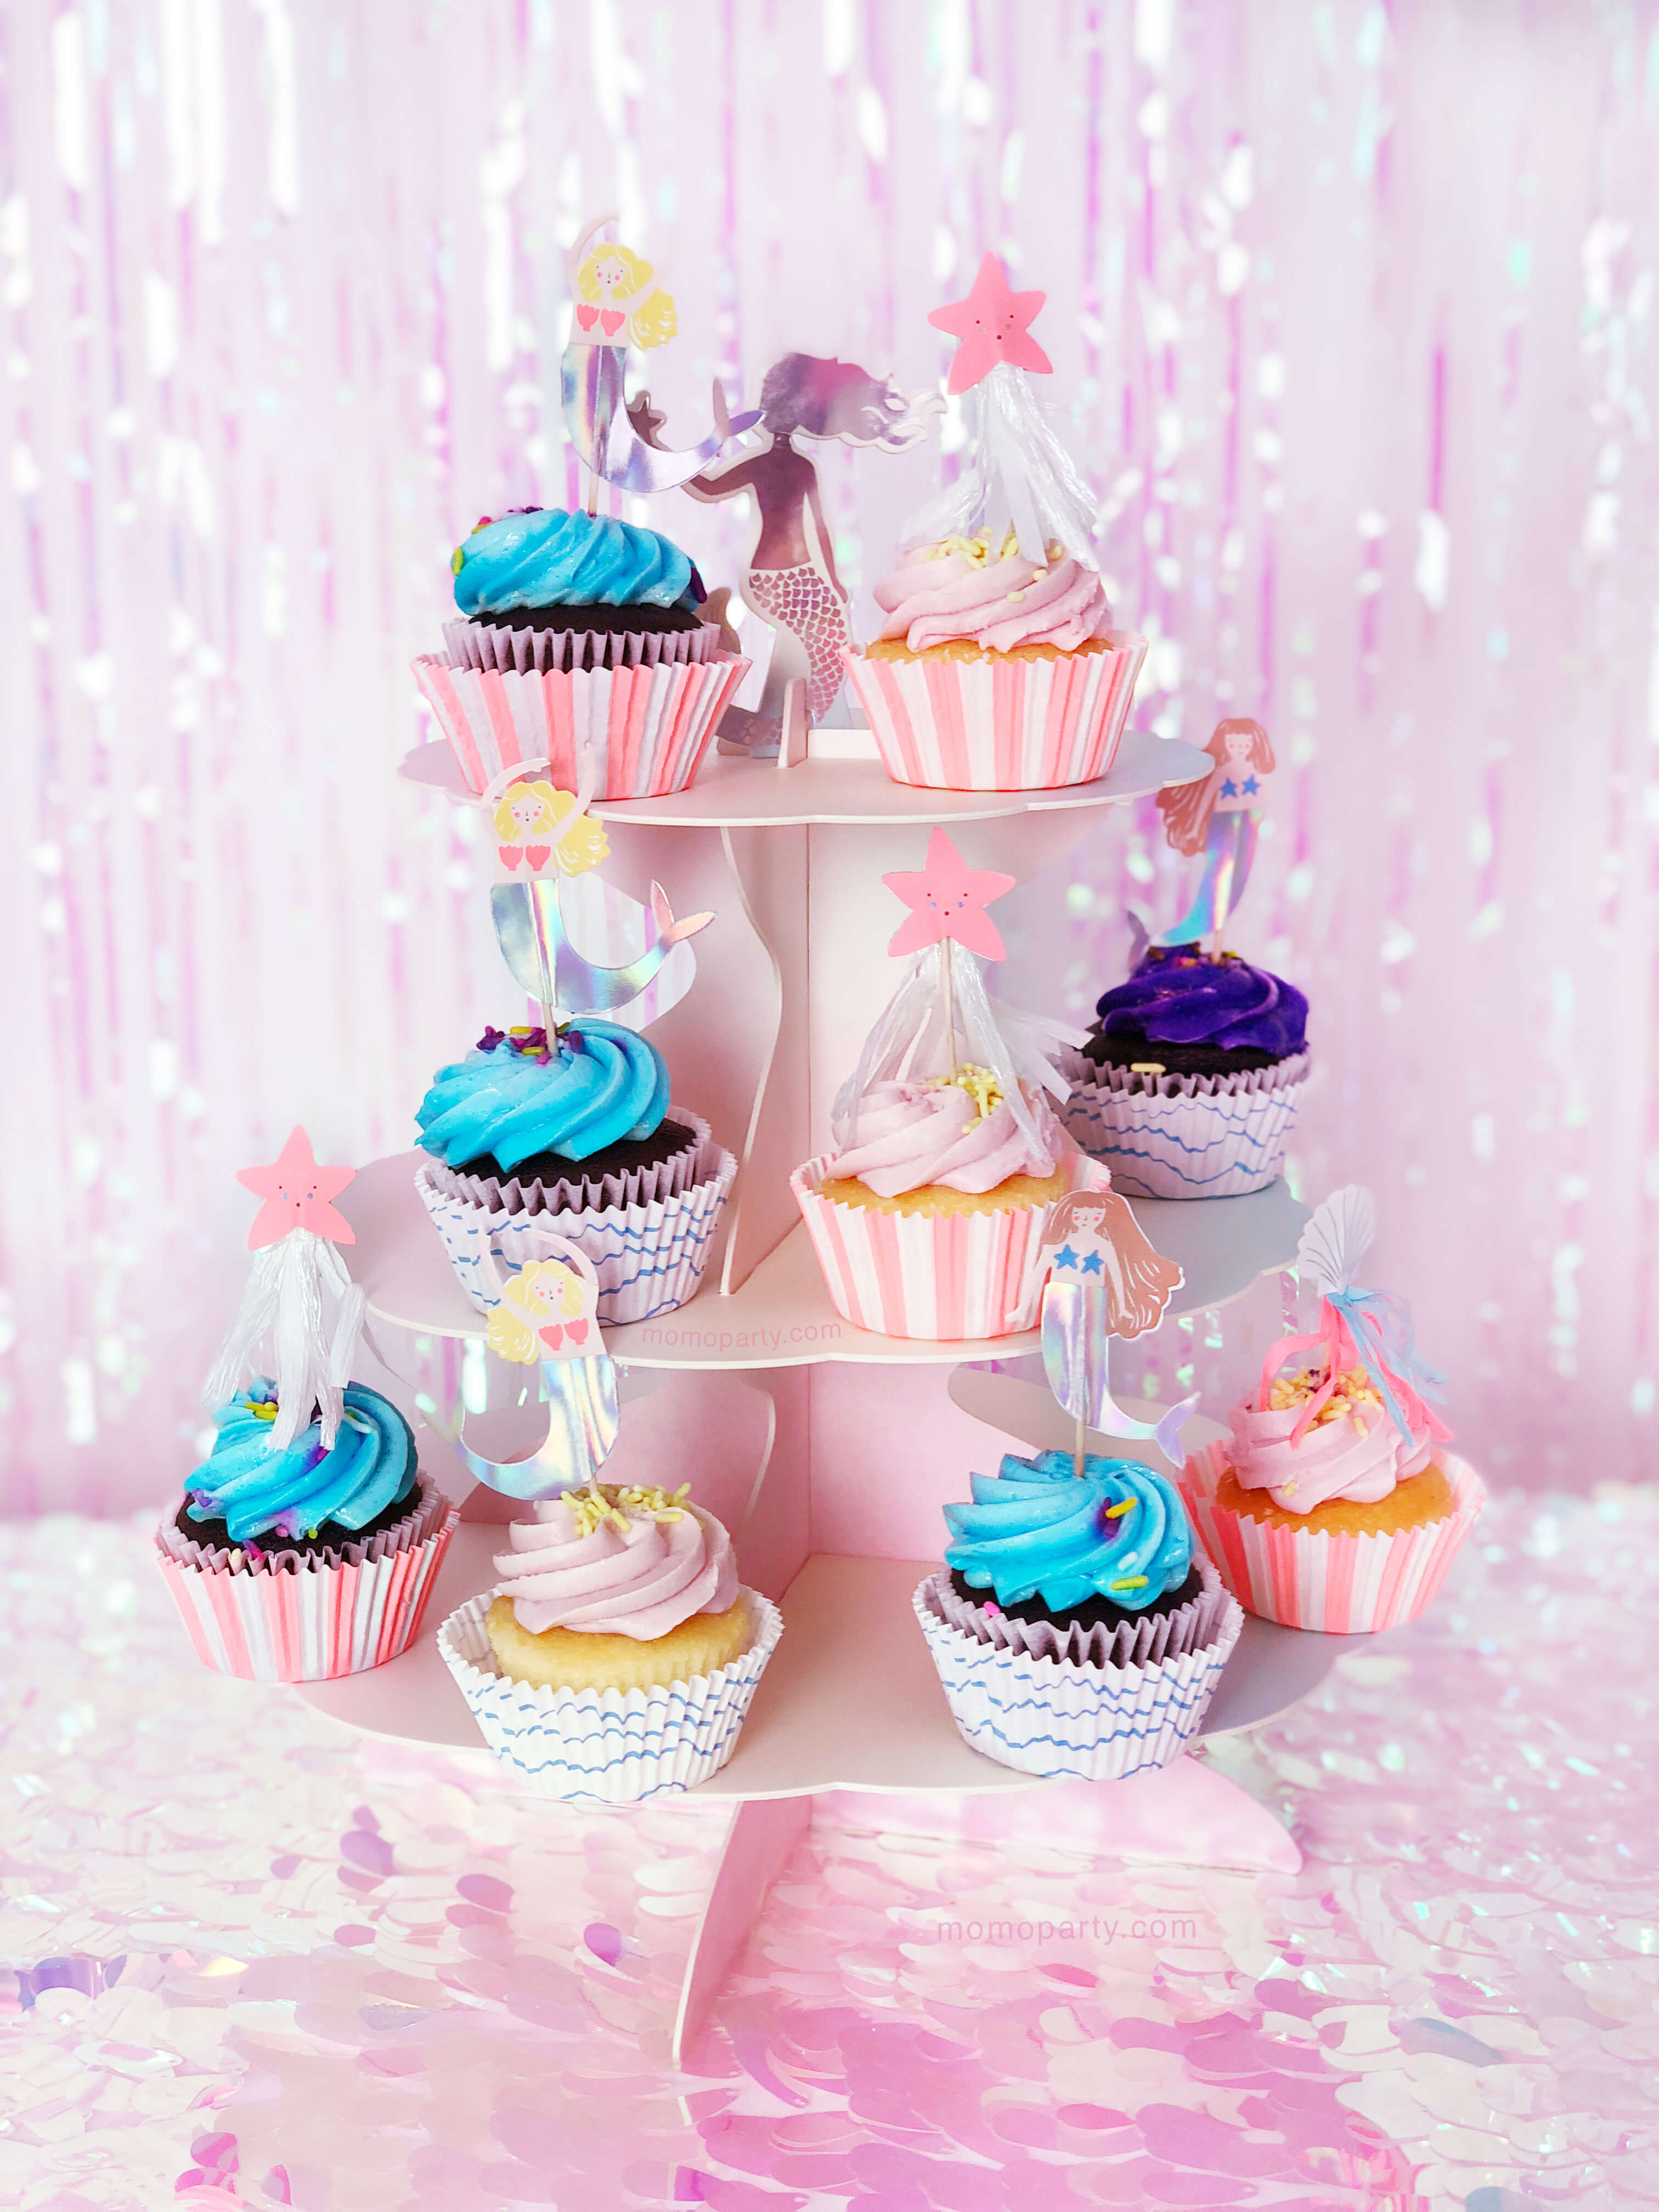 cupcakes with Mermaid themed toppers on the pink cake stand